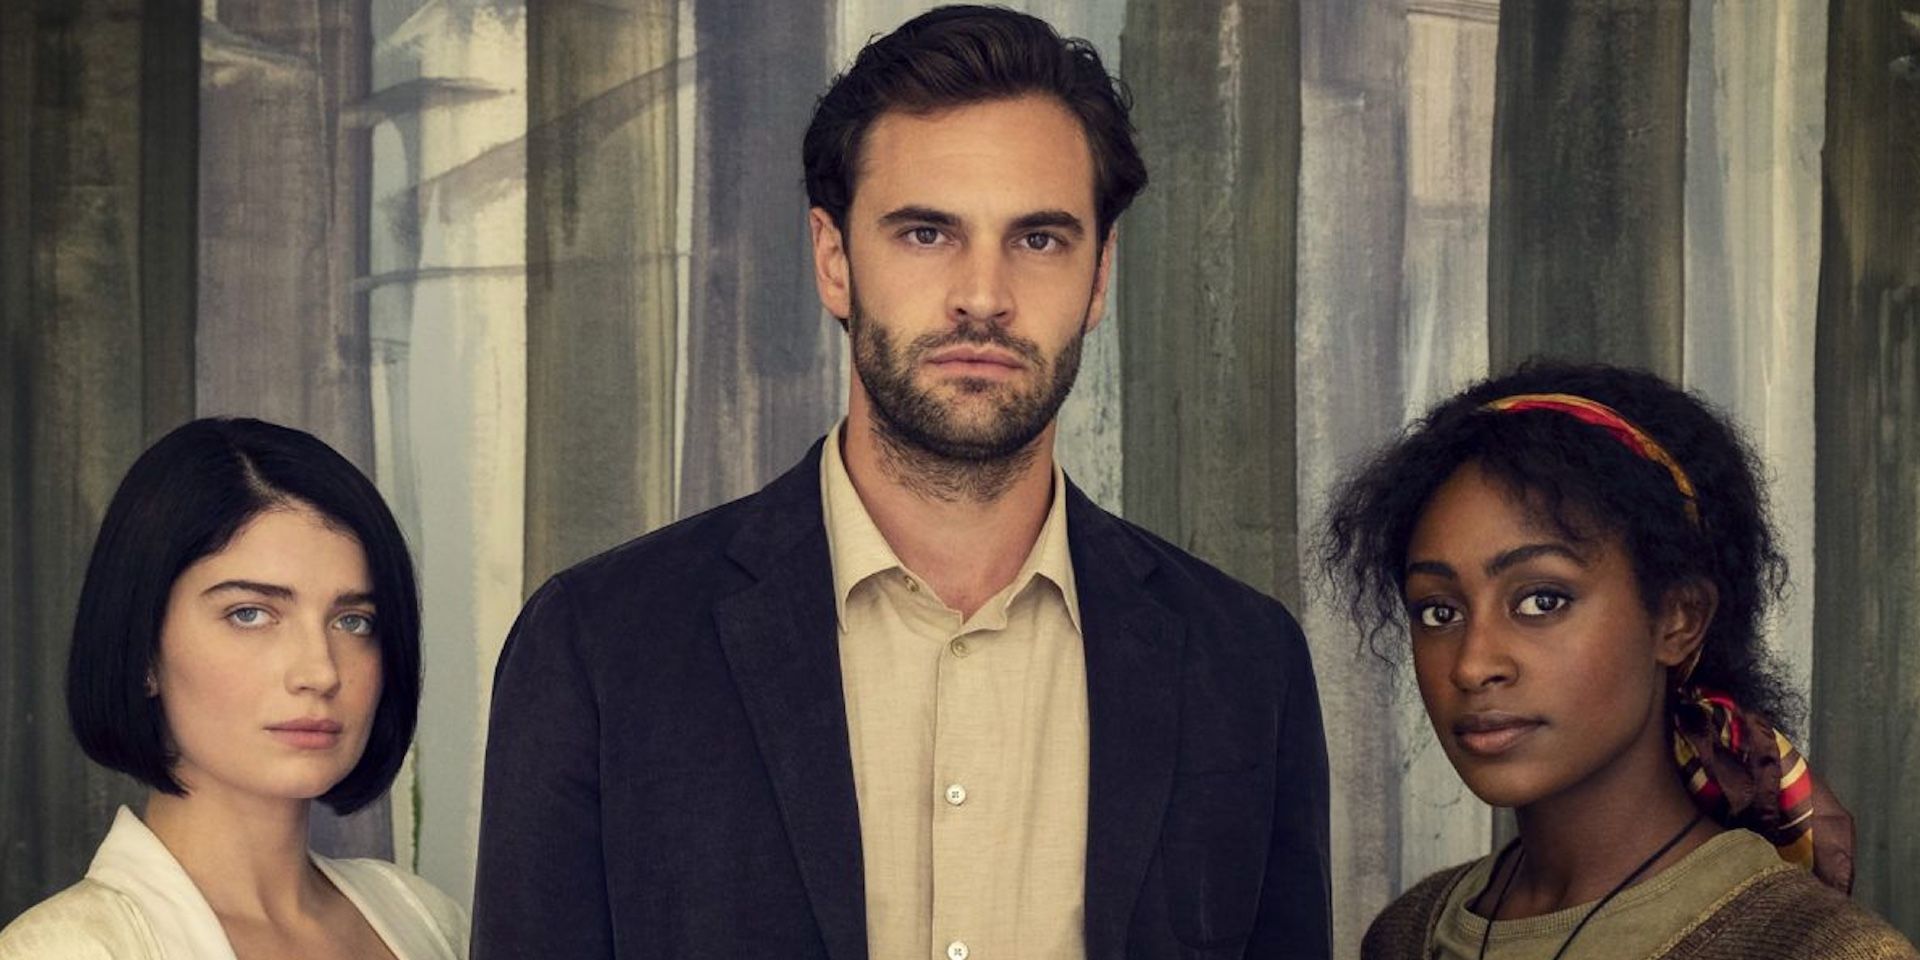 Eve Hewson, Tom Bateman, and Simona Brown looking directly into the camera in Behind Her Eyes on Netflix